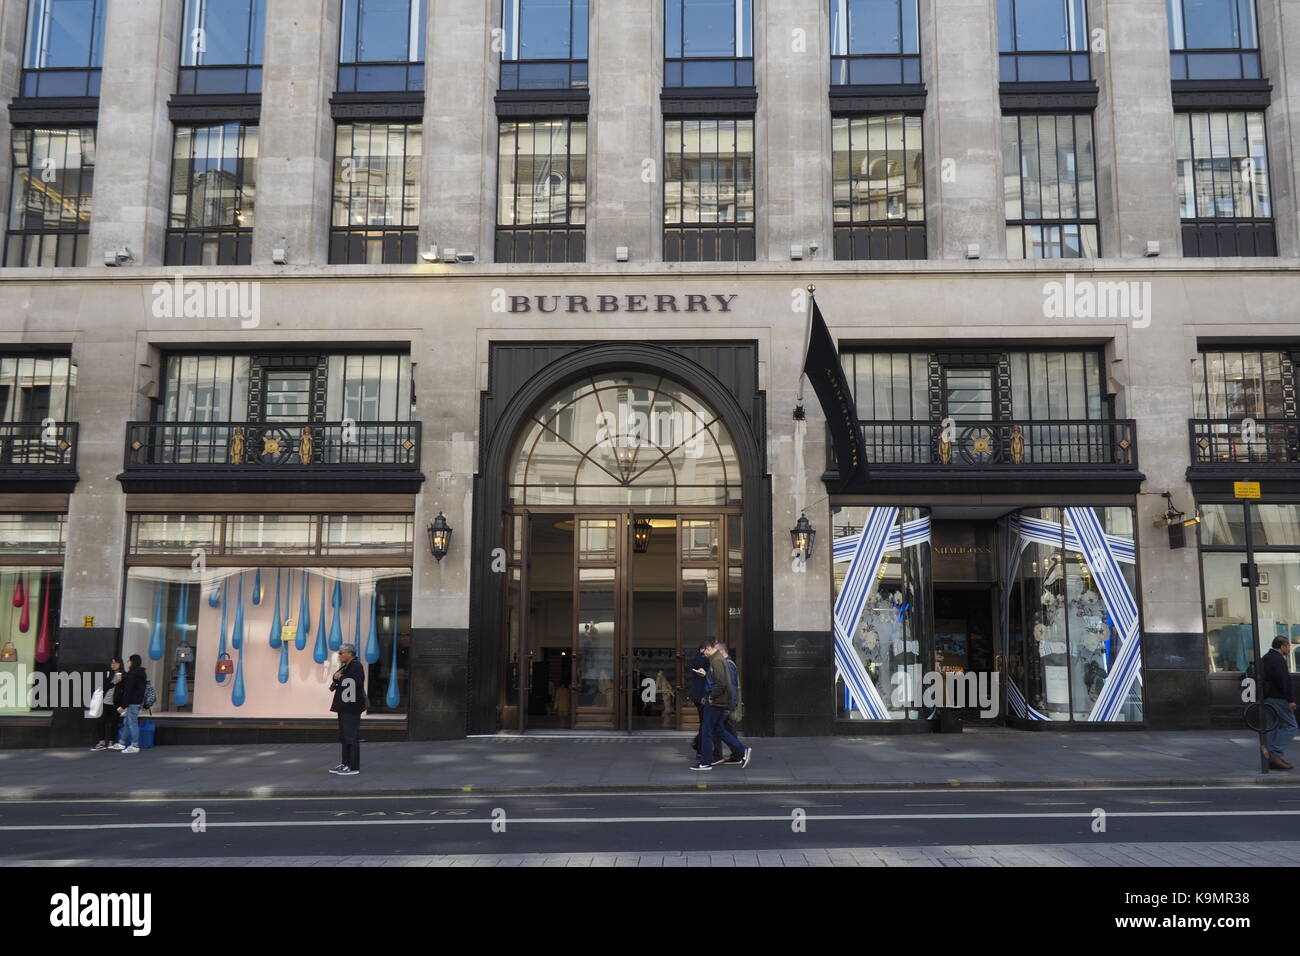 Burberry Store London Oxford Street | The Art of Mike Mignola